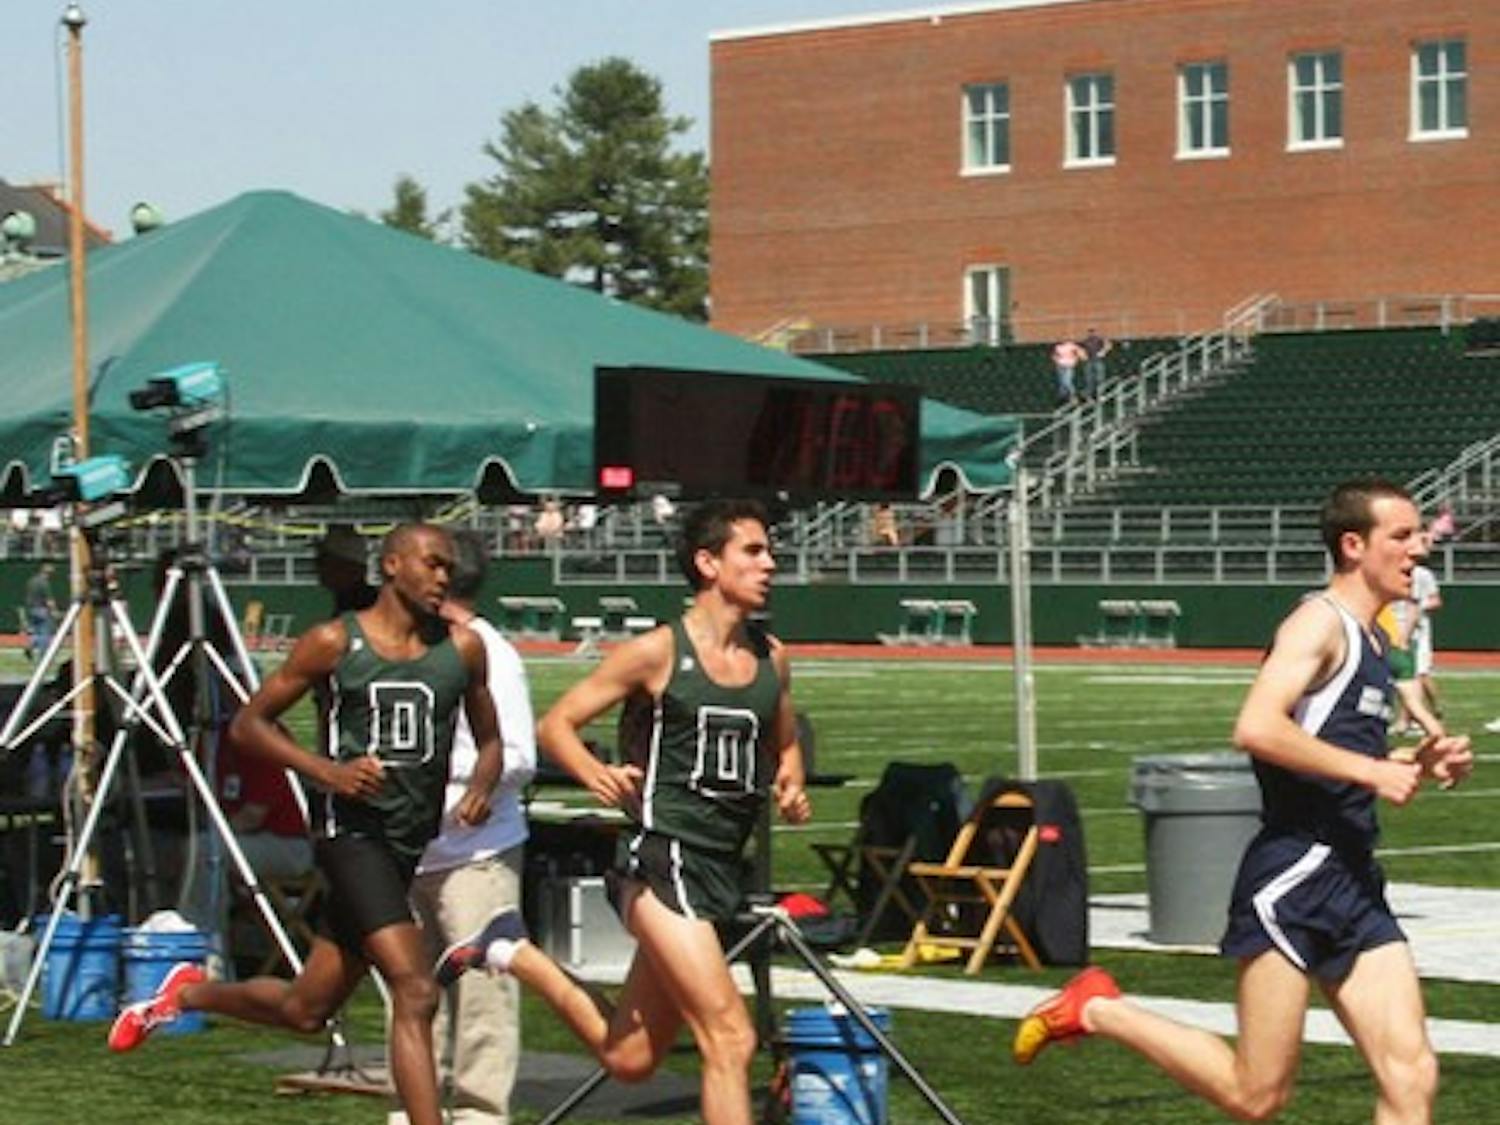 Five Dartmouth track and field athletes will move on to the NCAA regional meet starting on Friday, May 30 at Florida State University in Tallahassee, Fla.